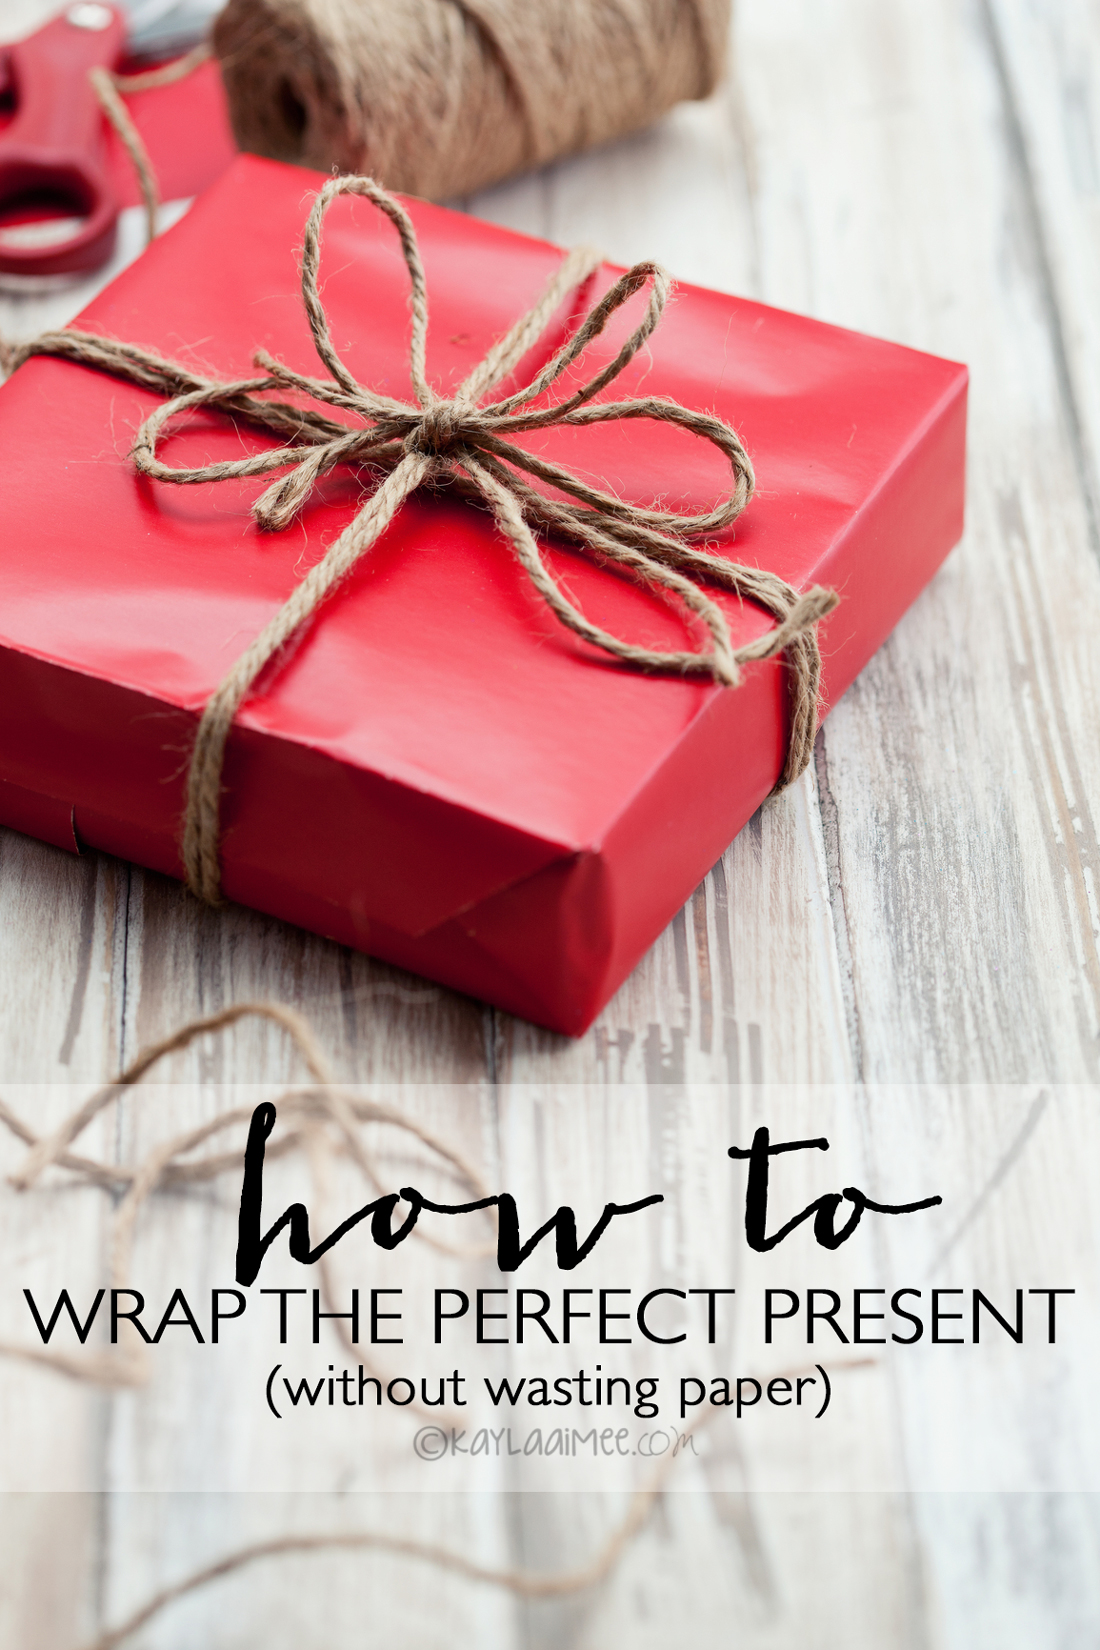 How To Wrap The Perfect Present WITHOUT Wasting Paper! Great tip!